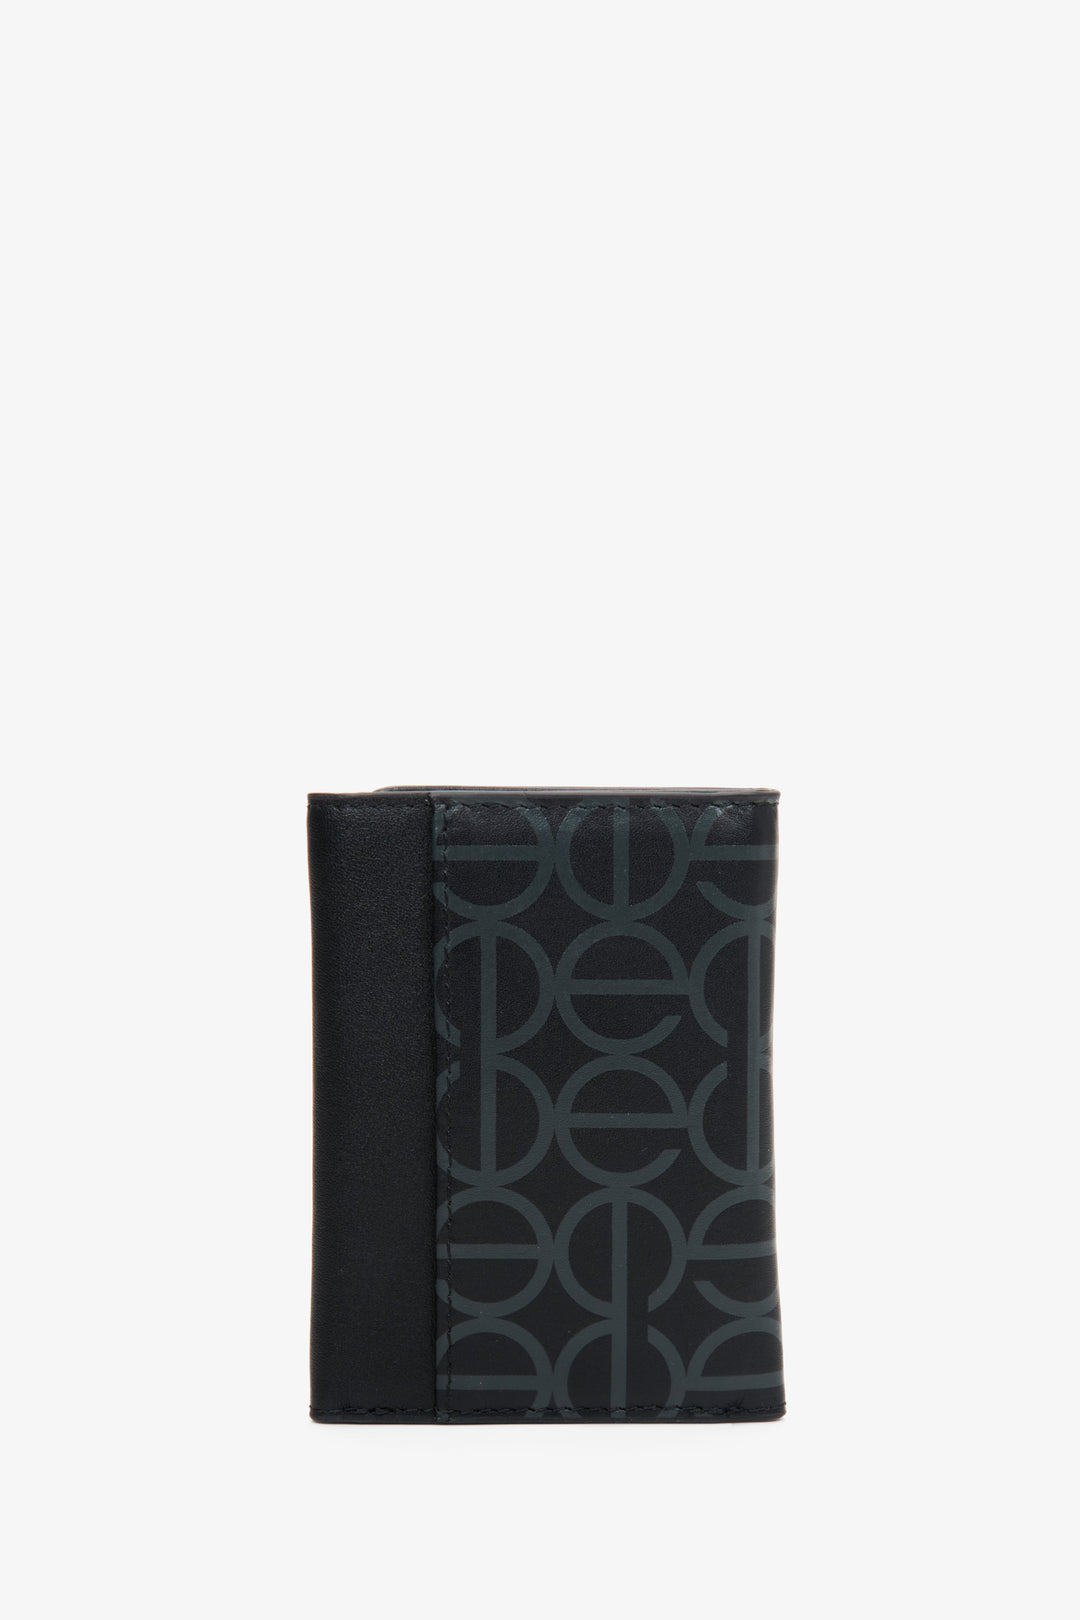 Women's black wallet by Estro with silver accents - reverse side.